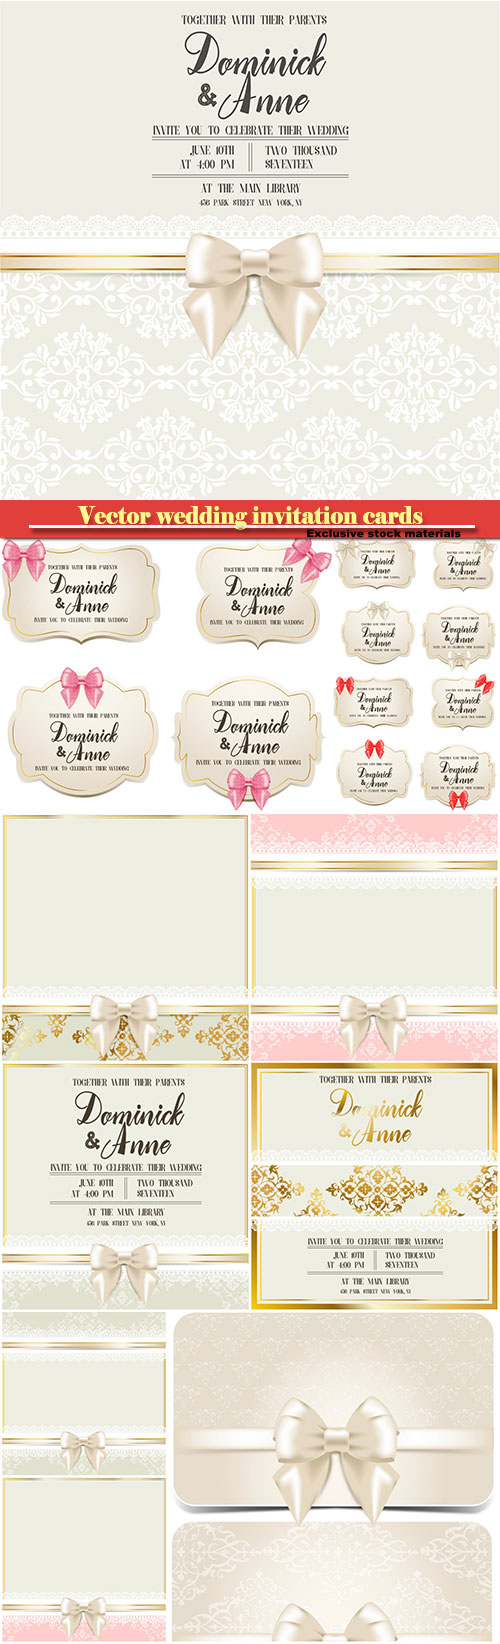 Wedding cards and invitation cards in vector